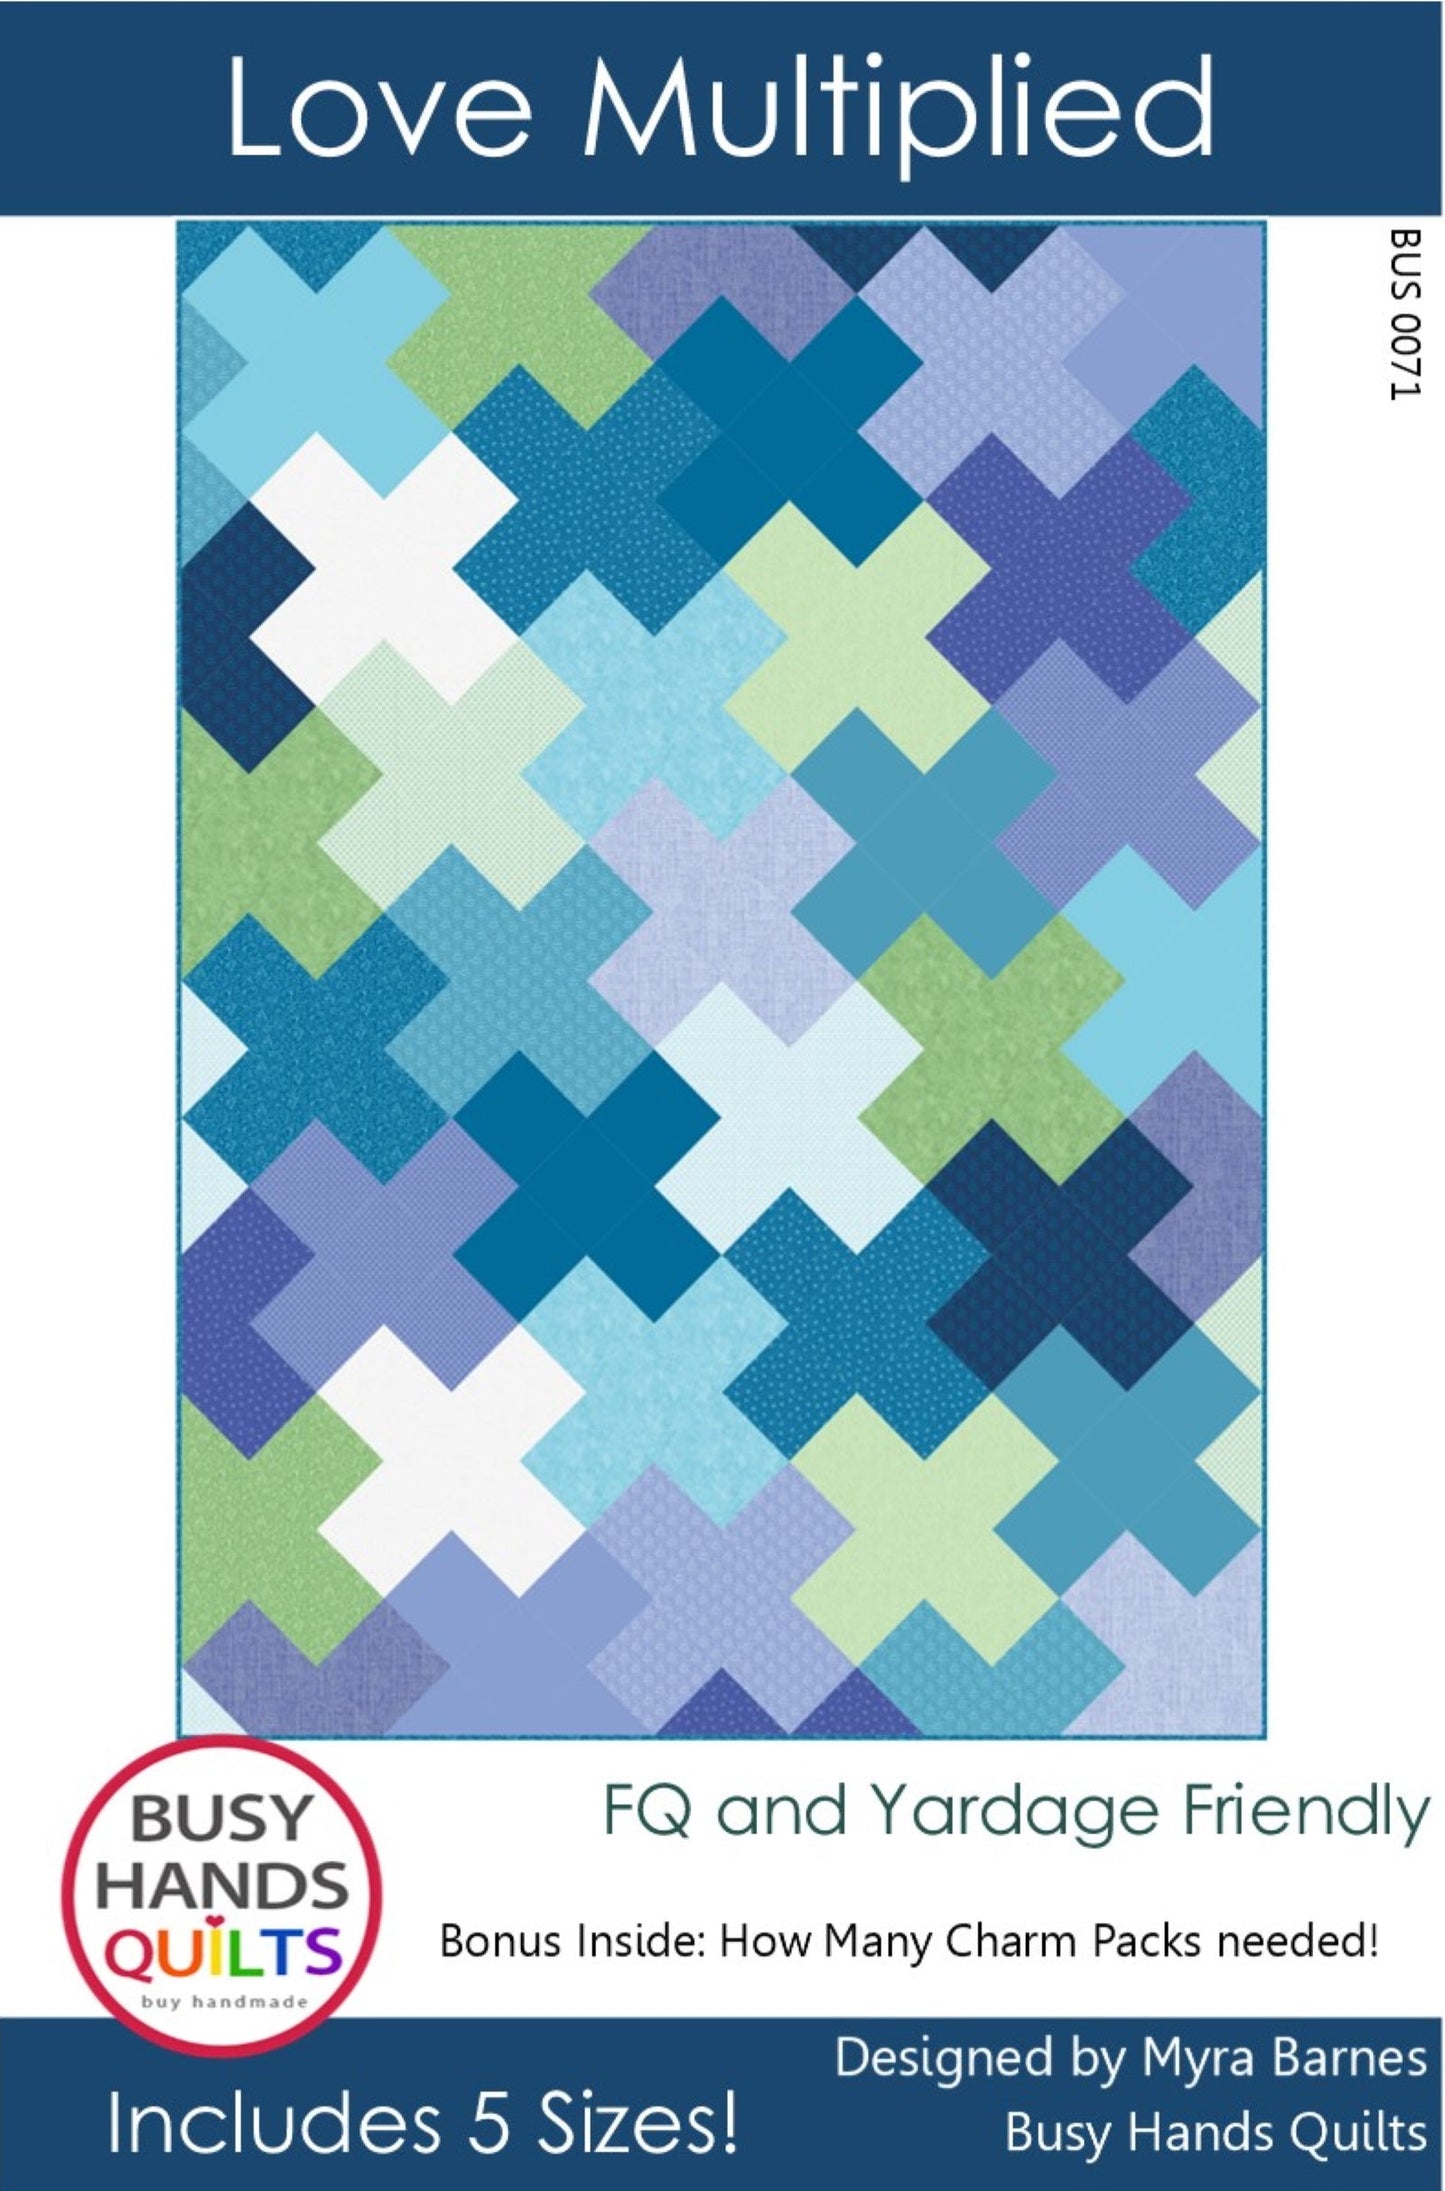 Love Multiplied Quilt Pattern PDF DOWNLOAD Busy Hands Quilts $12.99